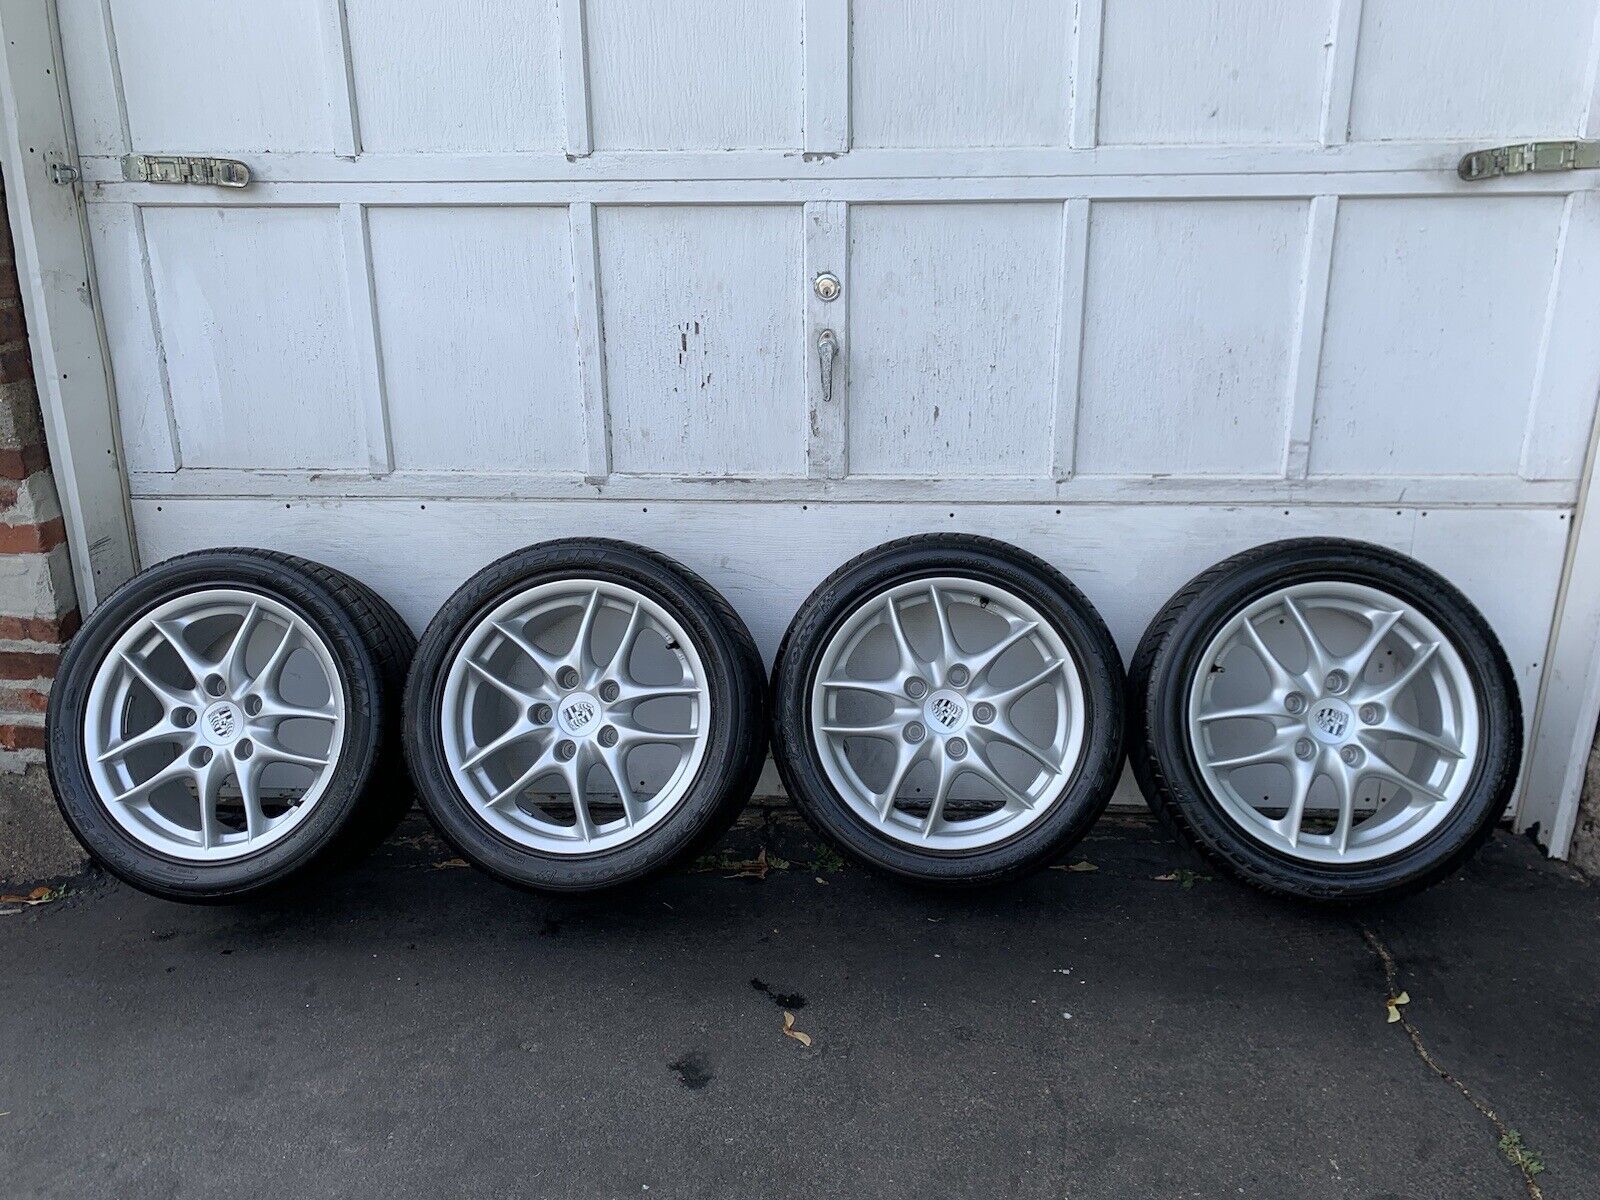 17” Porsche Boxster S rims & tires. Pickup & Cash Only At Caldwell NJ